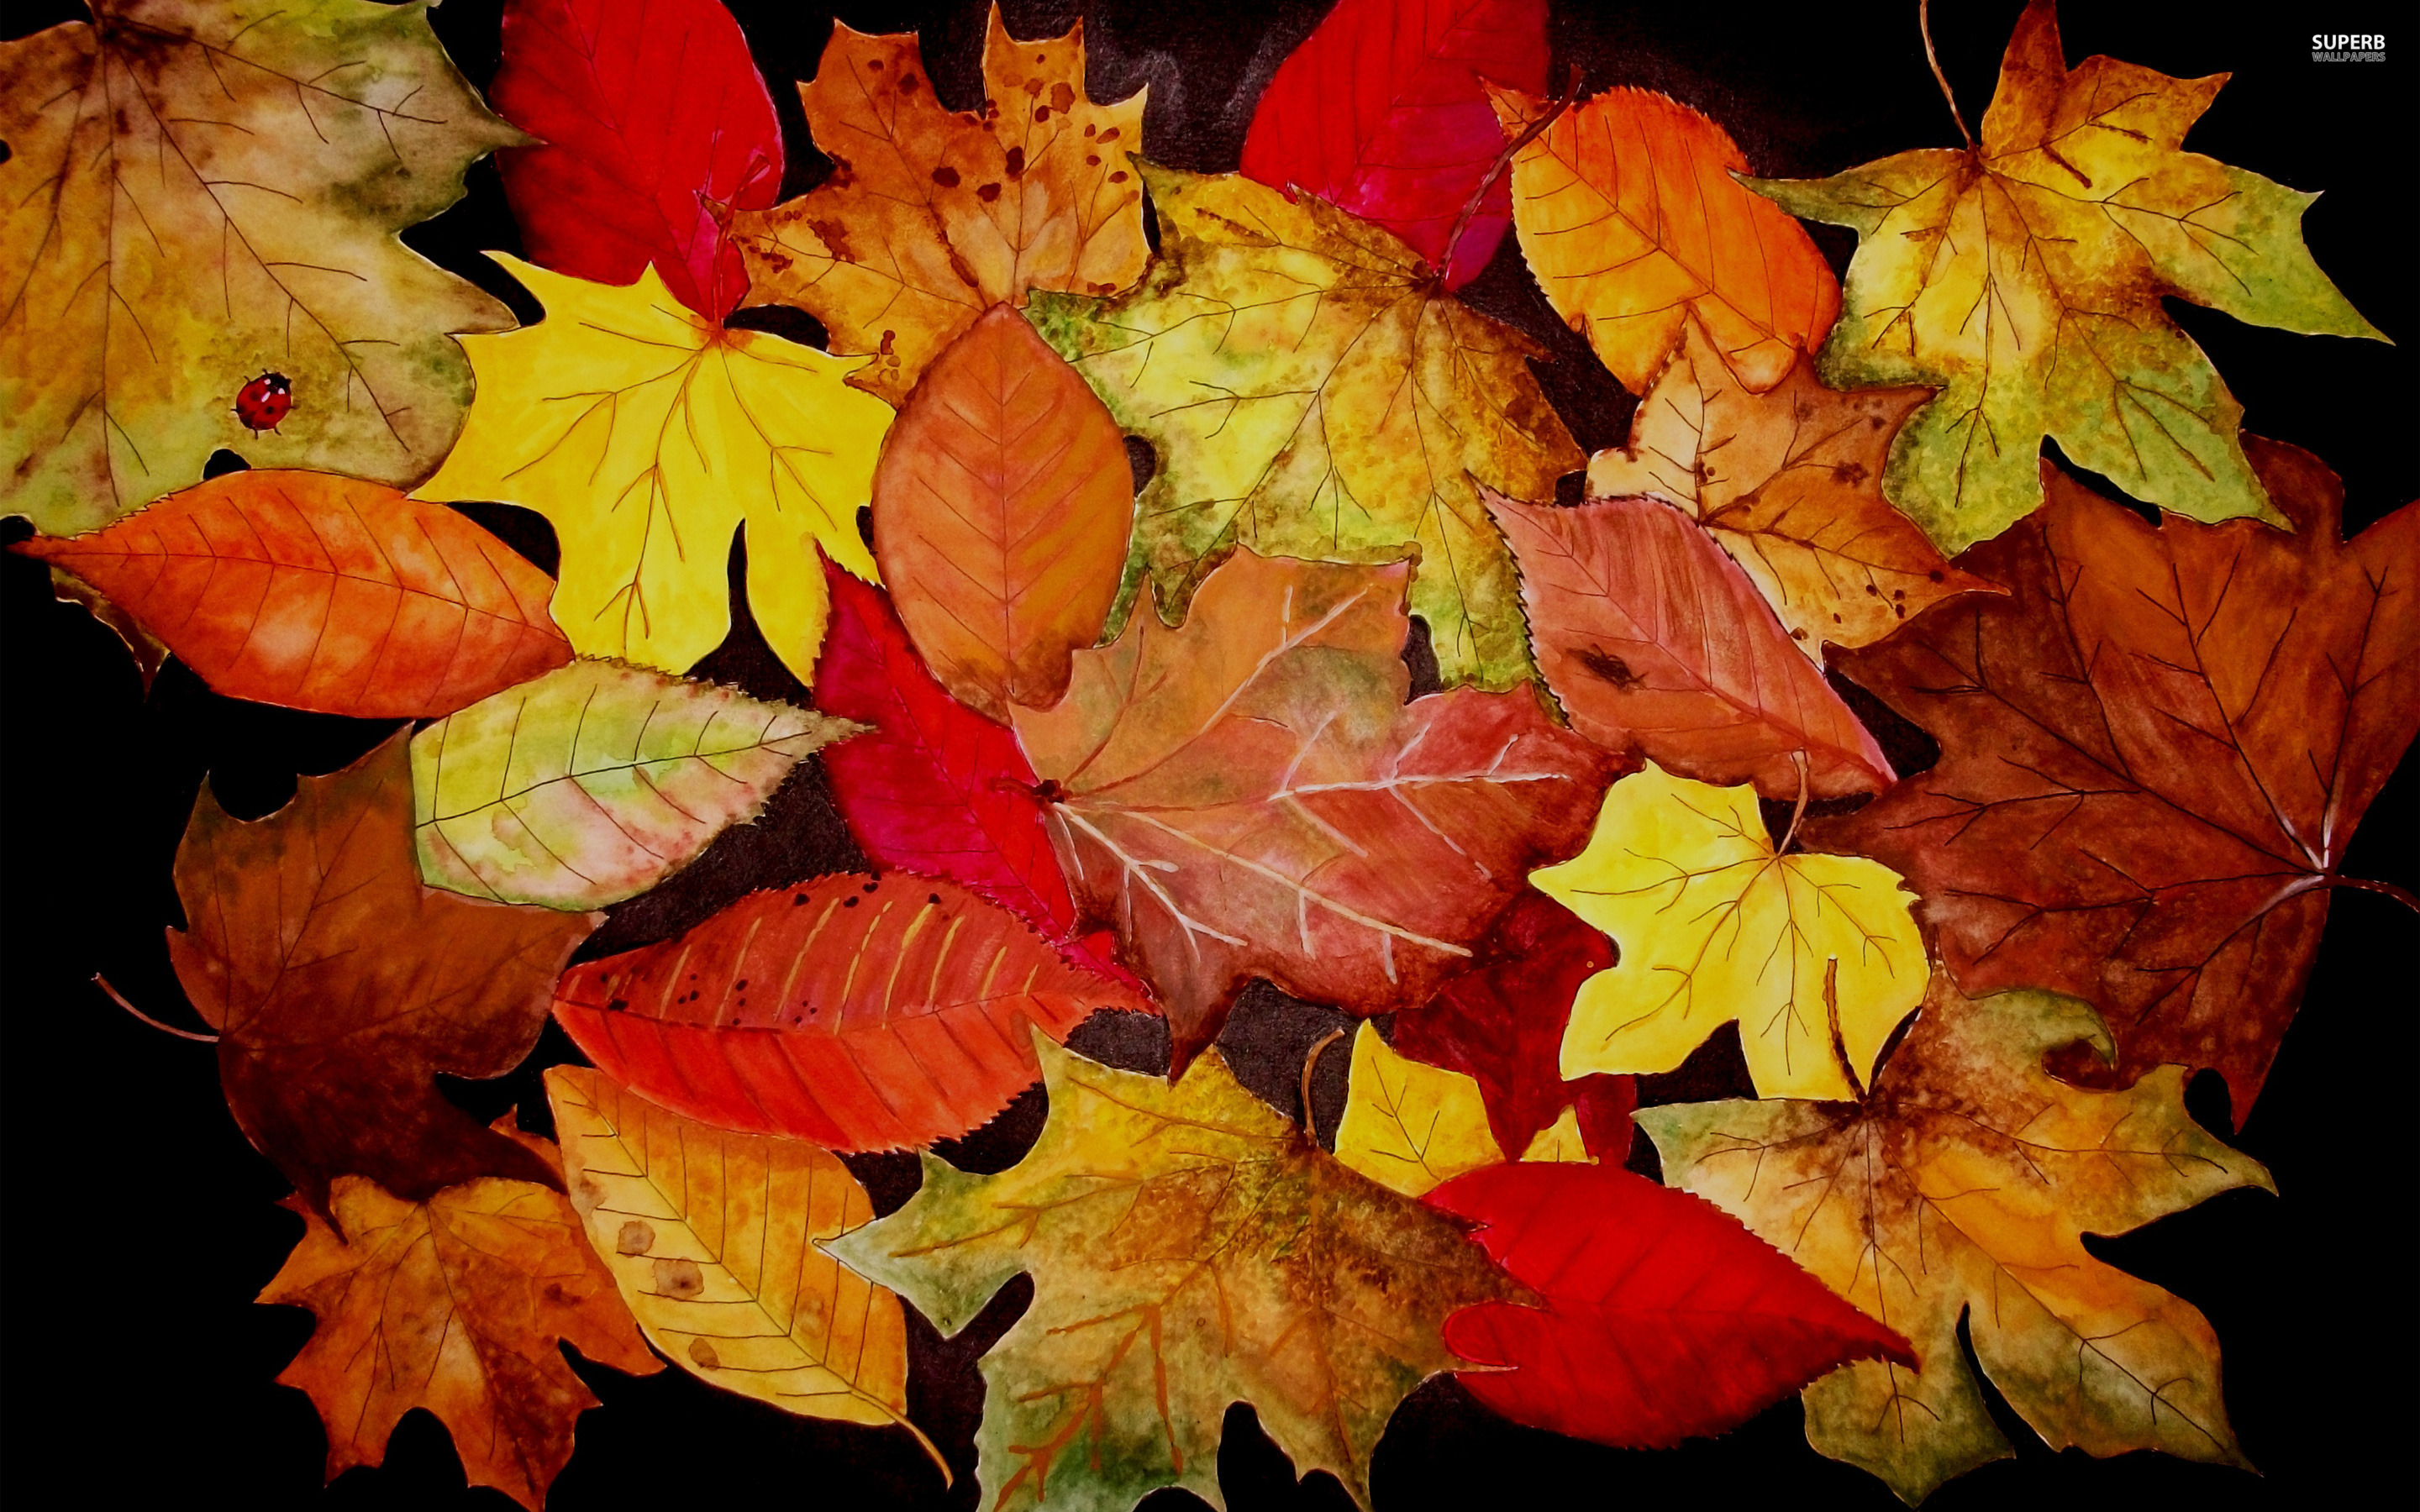 Autumn Leaves Wallpaper Related Keywords & Suggestions - Fall Leaves High Resolution Background - HD Wallpaper 